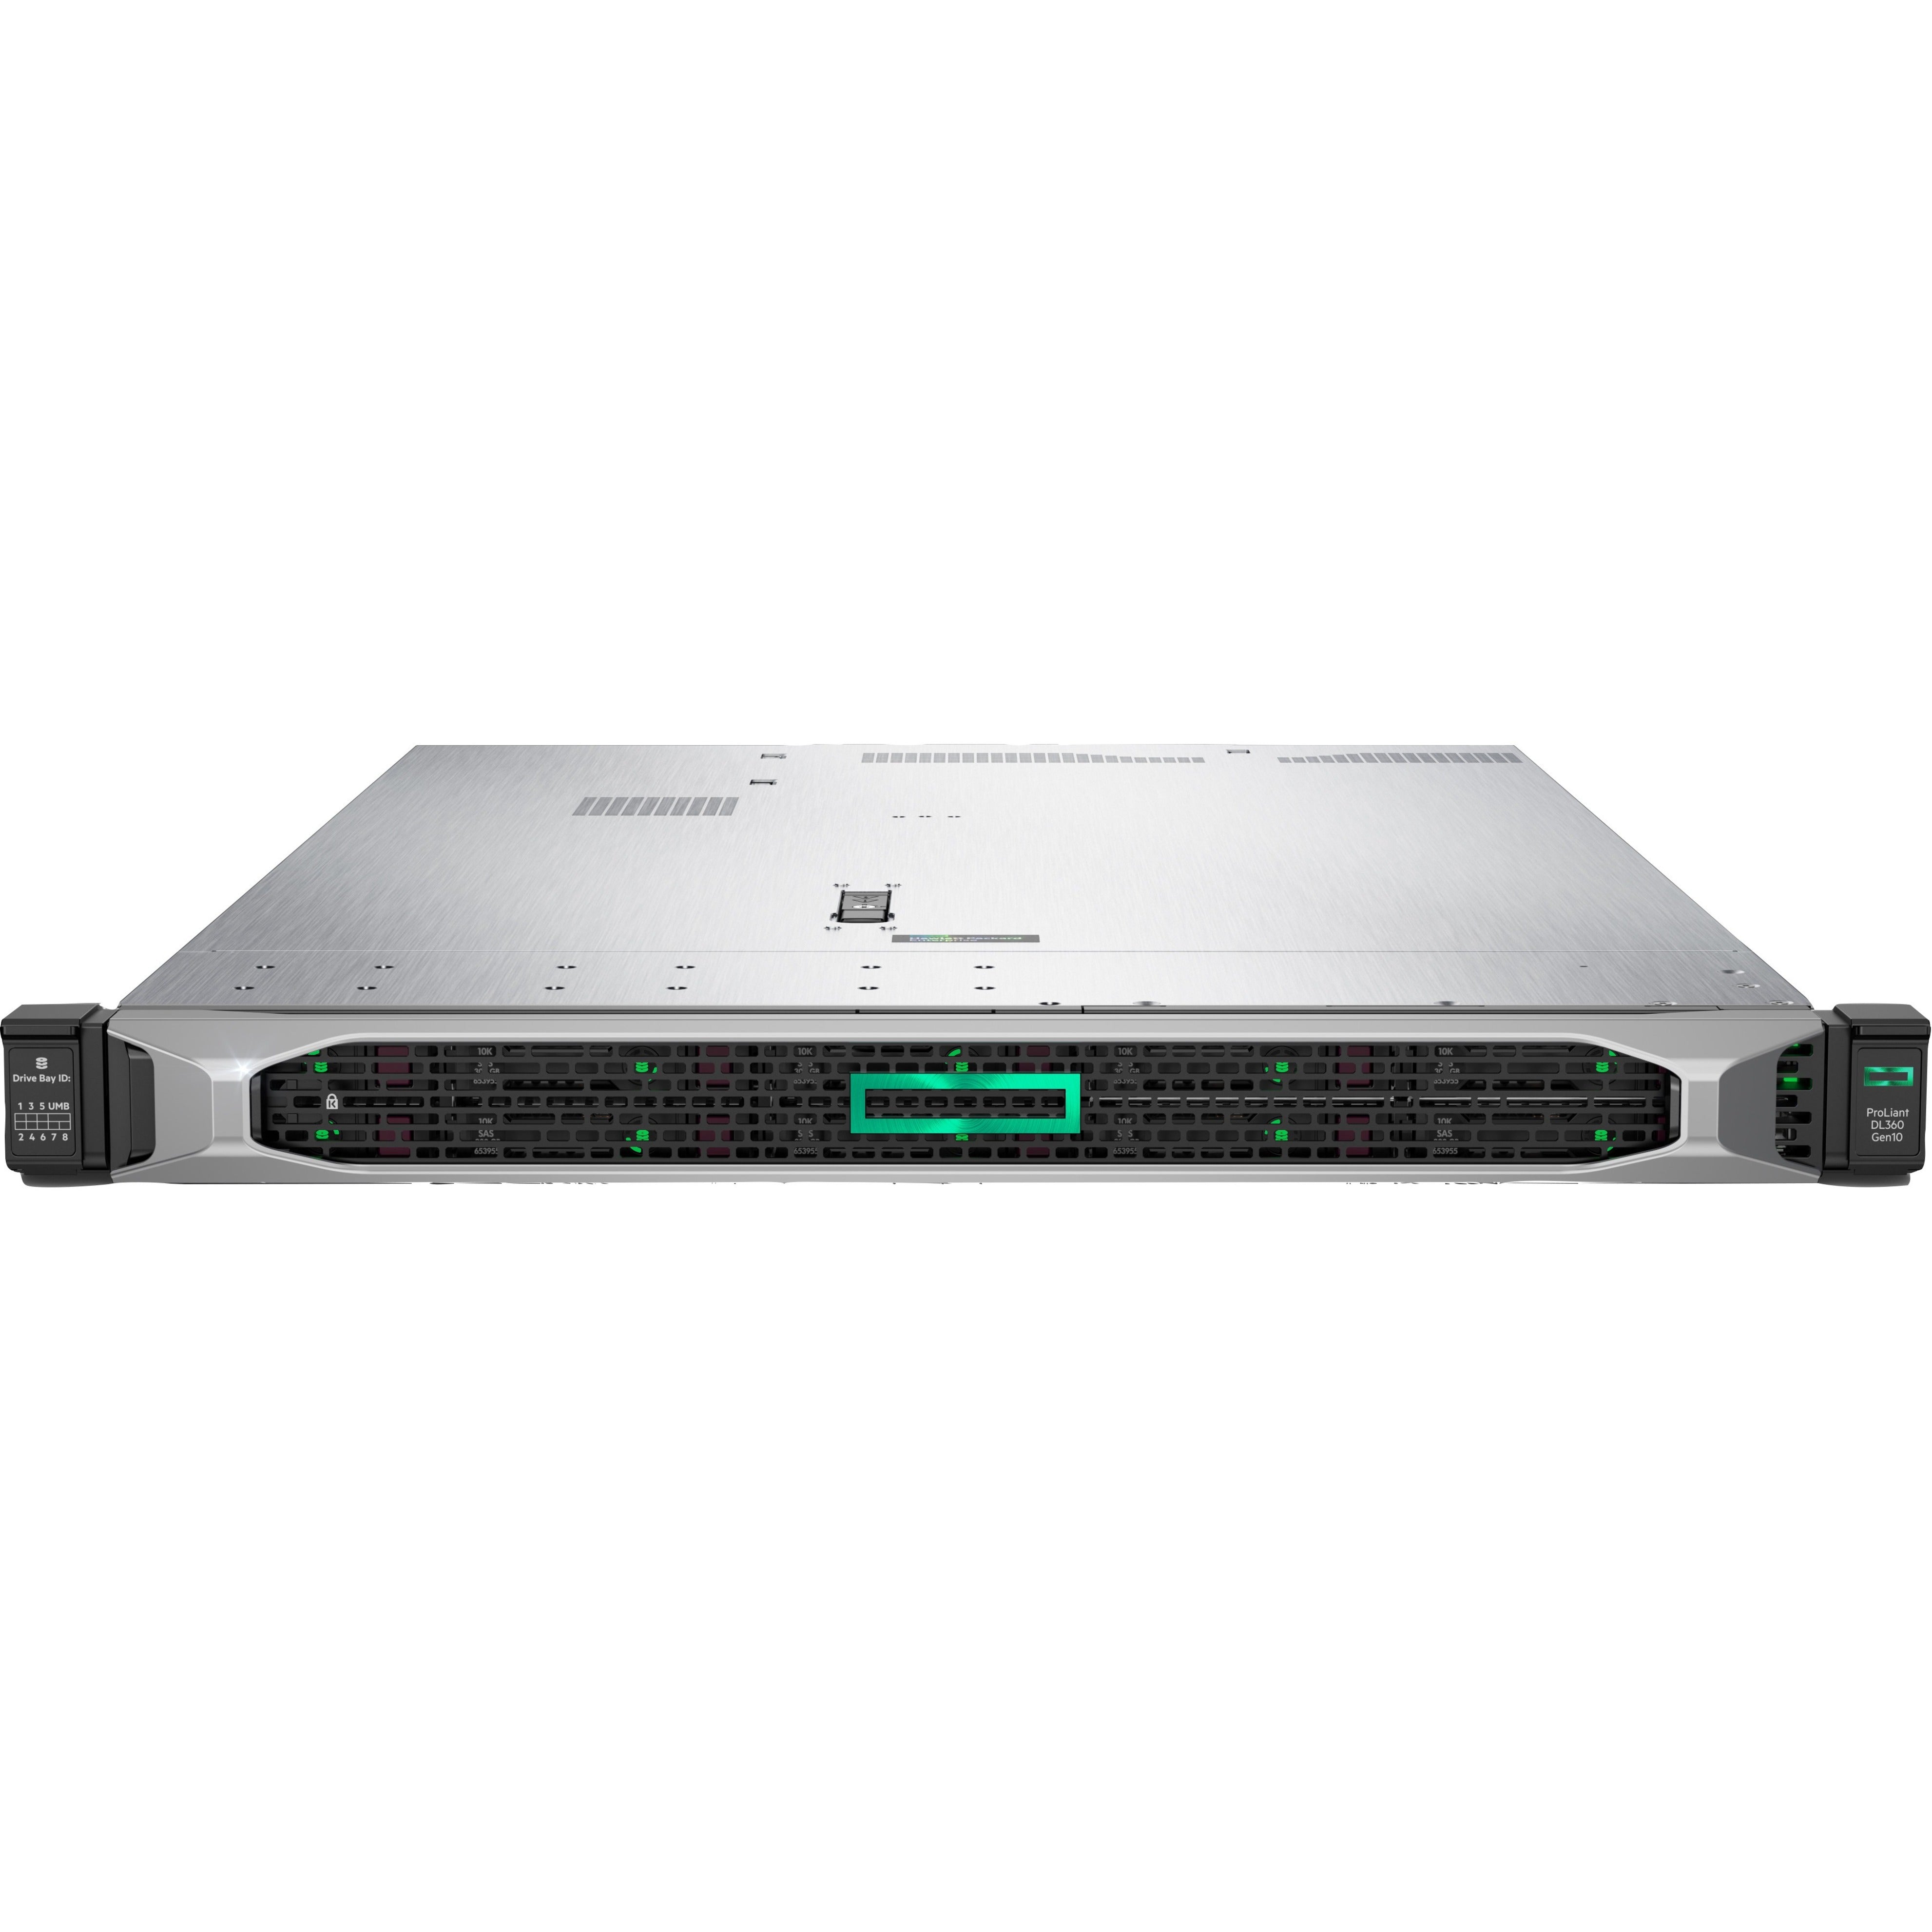 HPE P23579-B21 ProLiant DL360 Gen10 4214R 1P 32GB-R NC 8SFF 500W PS Server, Dodeca-core, 32GB RAM, 2.40 GHz, RAID Supported